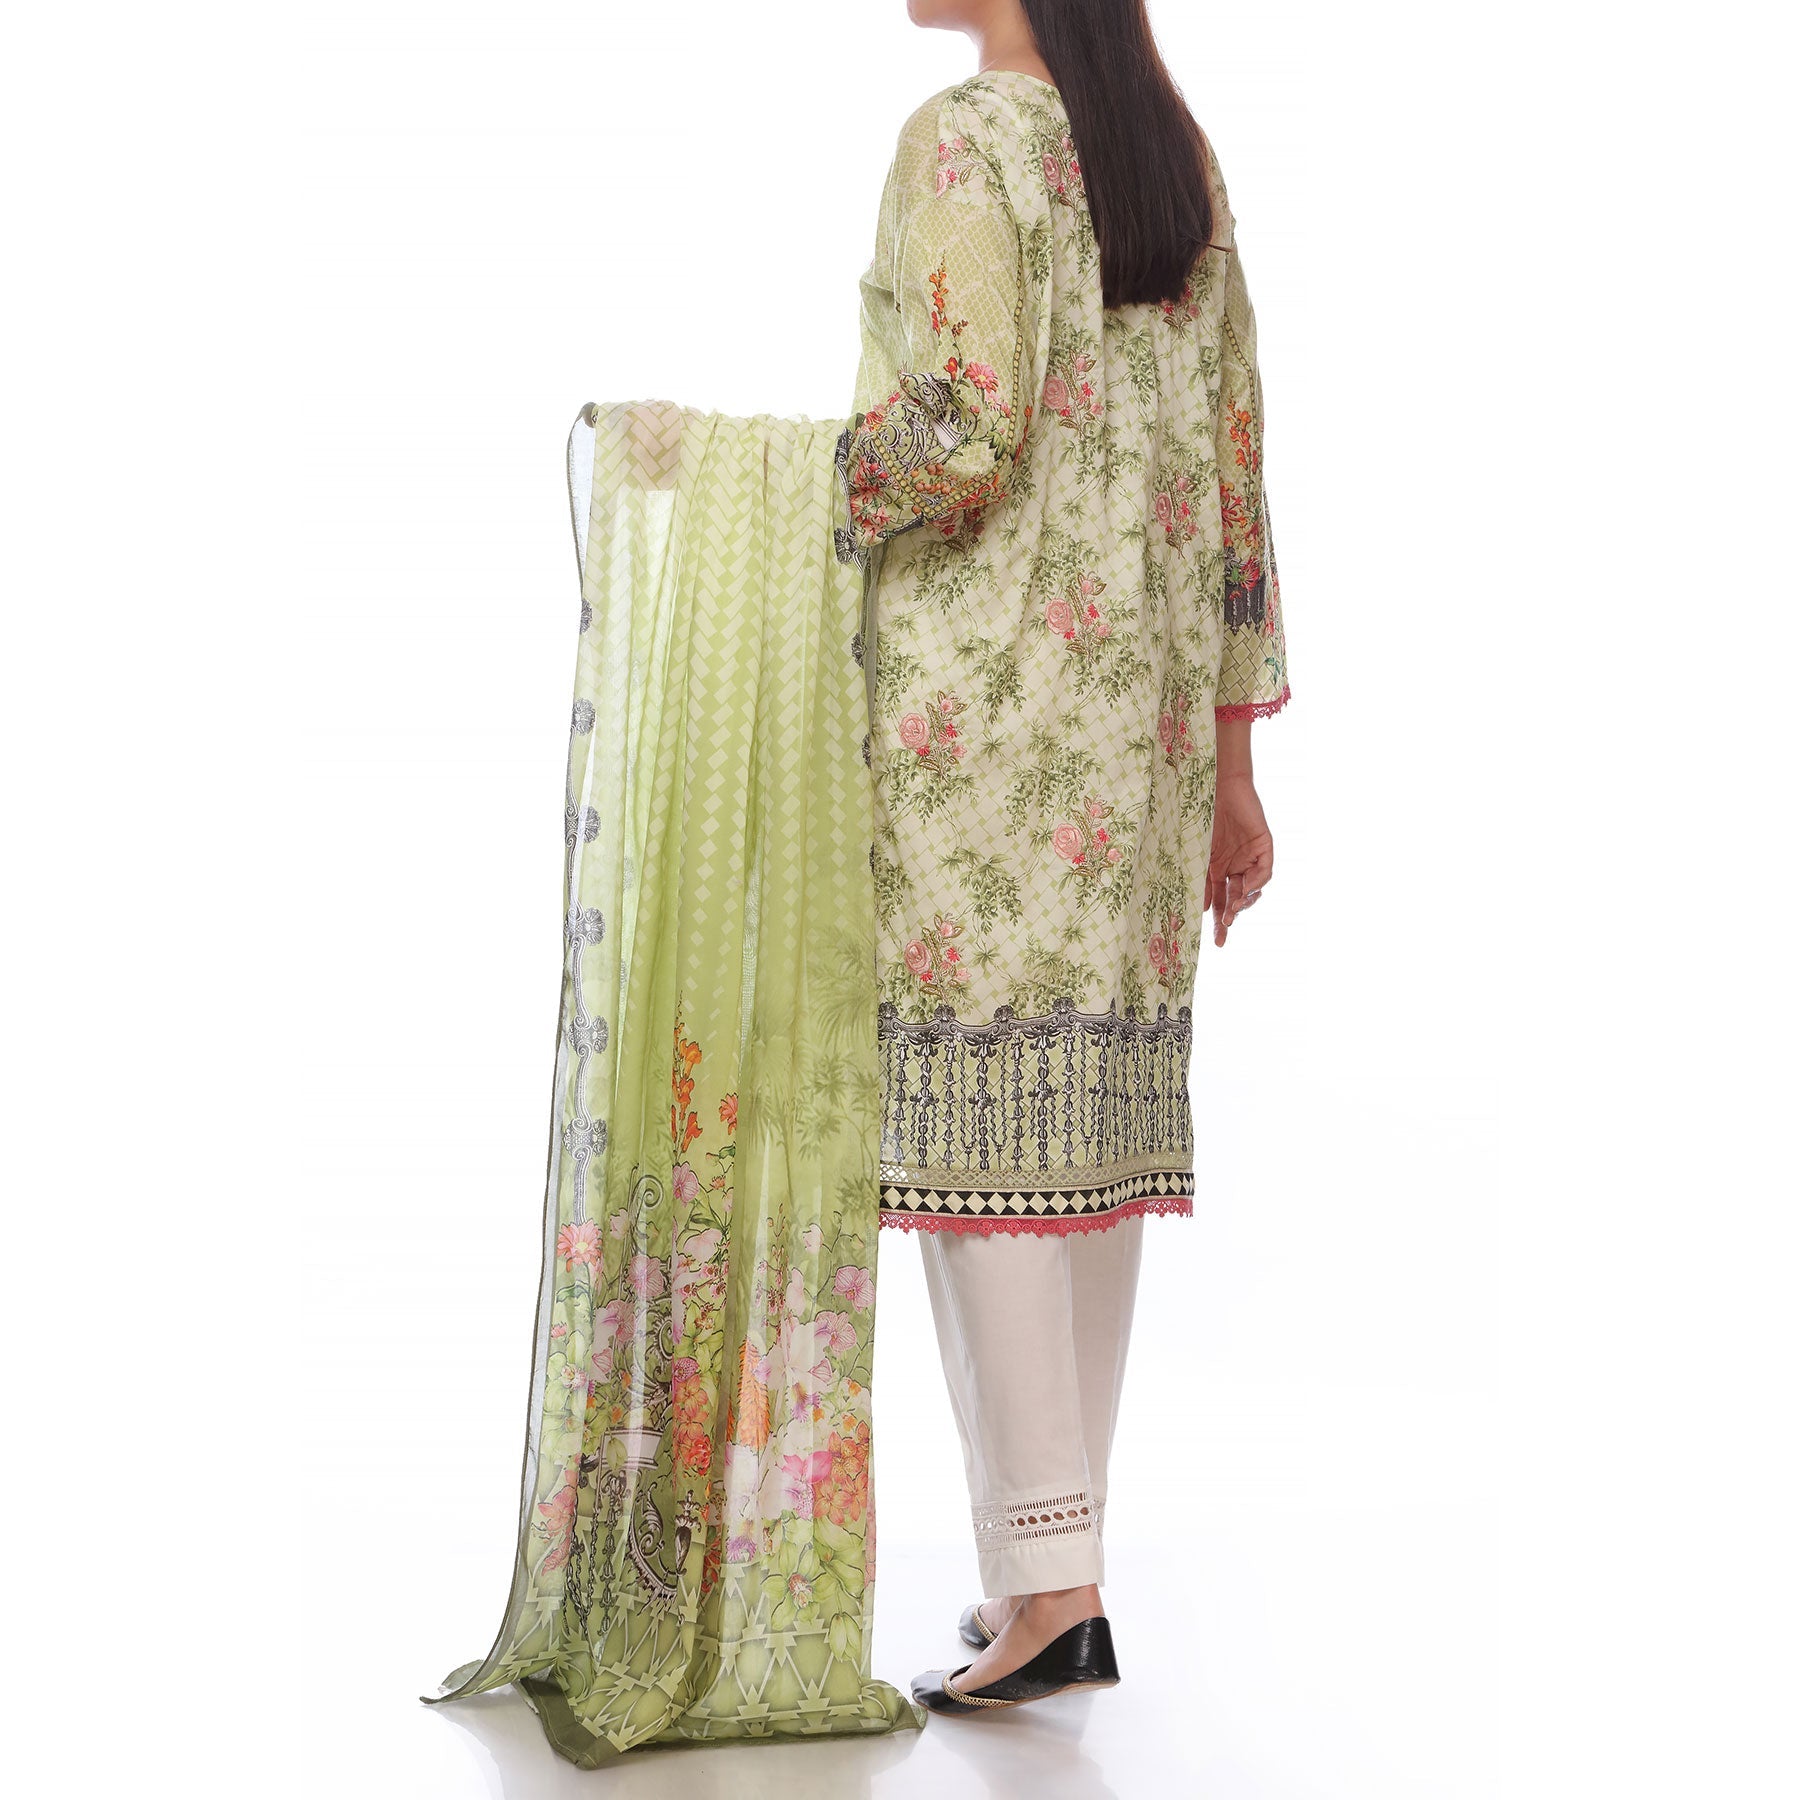 Digital Printed Lawn Shirt With Embroiderd Motif Front
Digital Printed Lawn Duppata